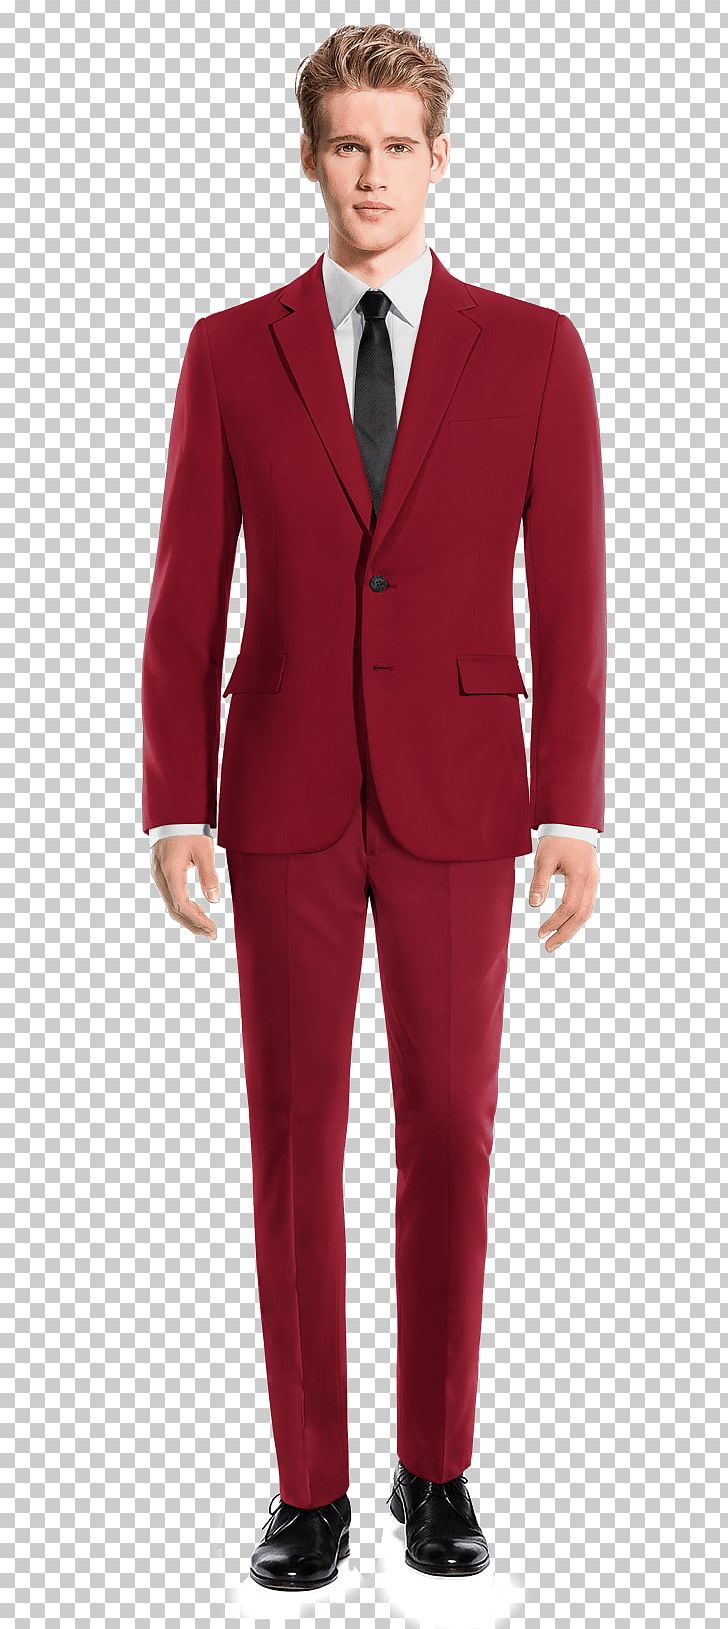 Suit Tweed Wool Tuxedo Pants PNG, Clipart, Blazer, Businessperson, Clothing, Coat, Cotton Free PNG Download